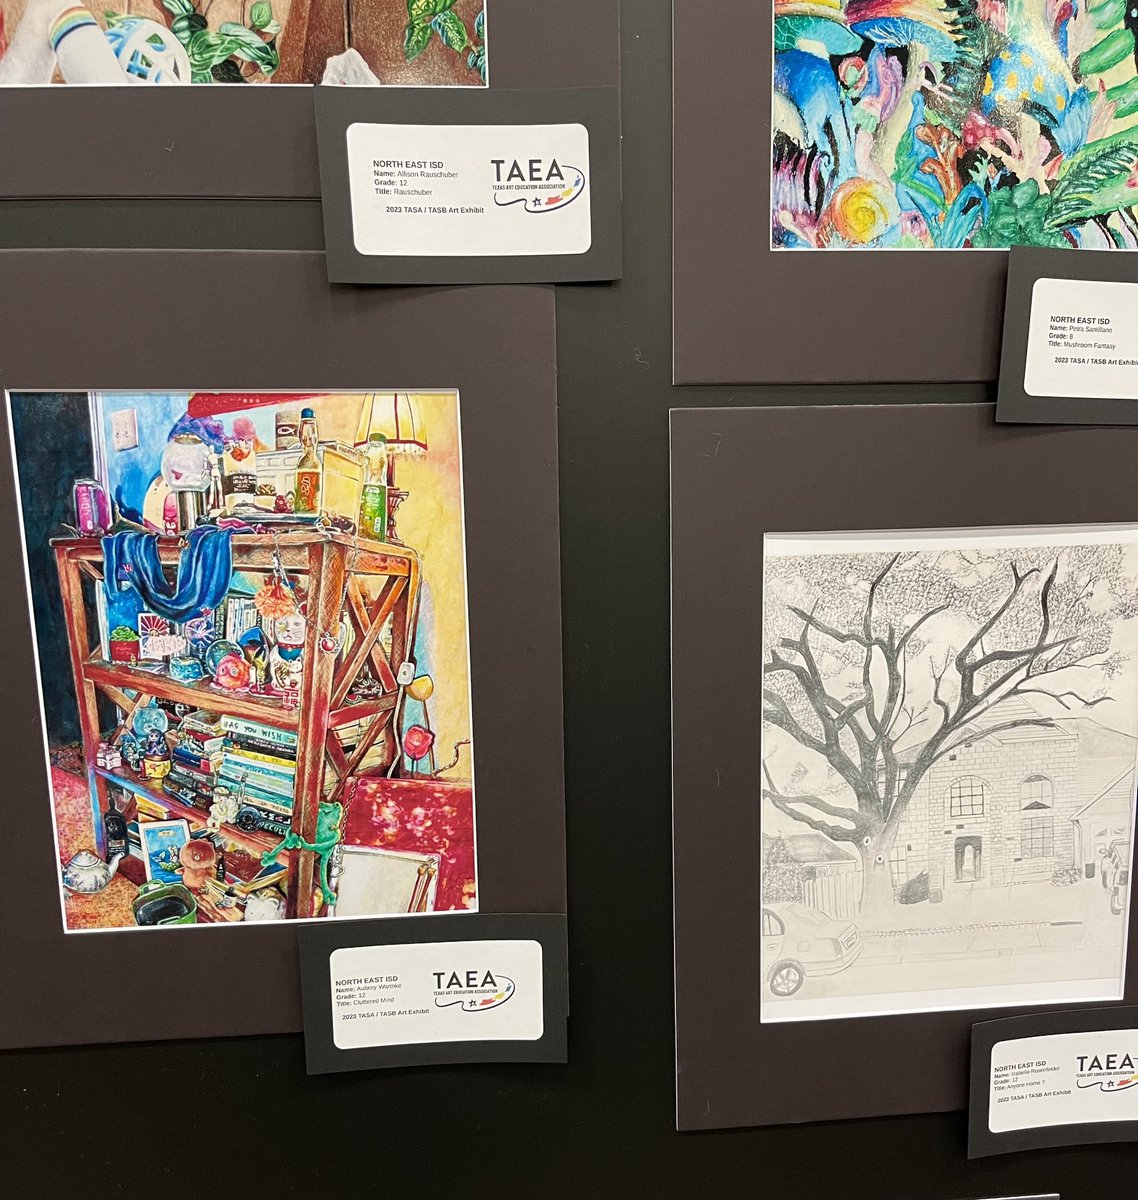 I love to visit the student art exhibit at the TASB conference. We have some very talented students in NEISD. Congrats to our students who had their artwork displayed!!